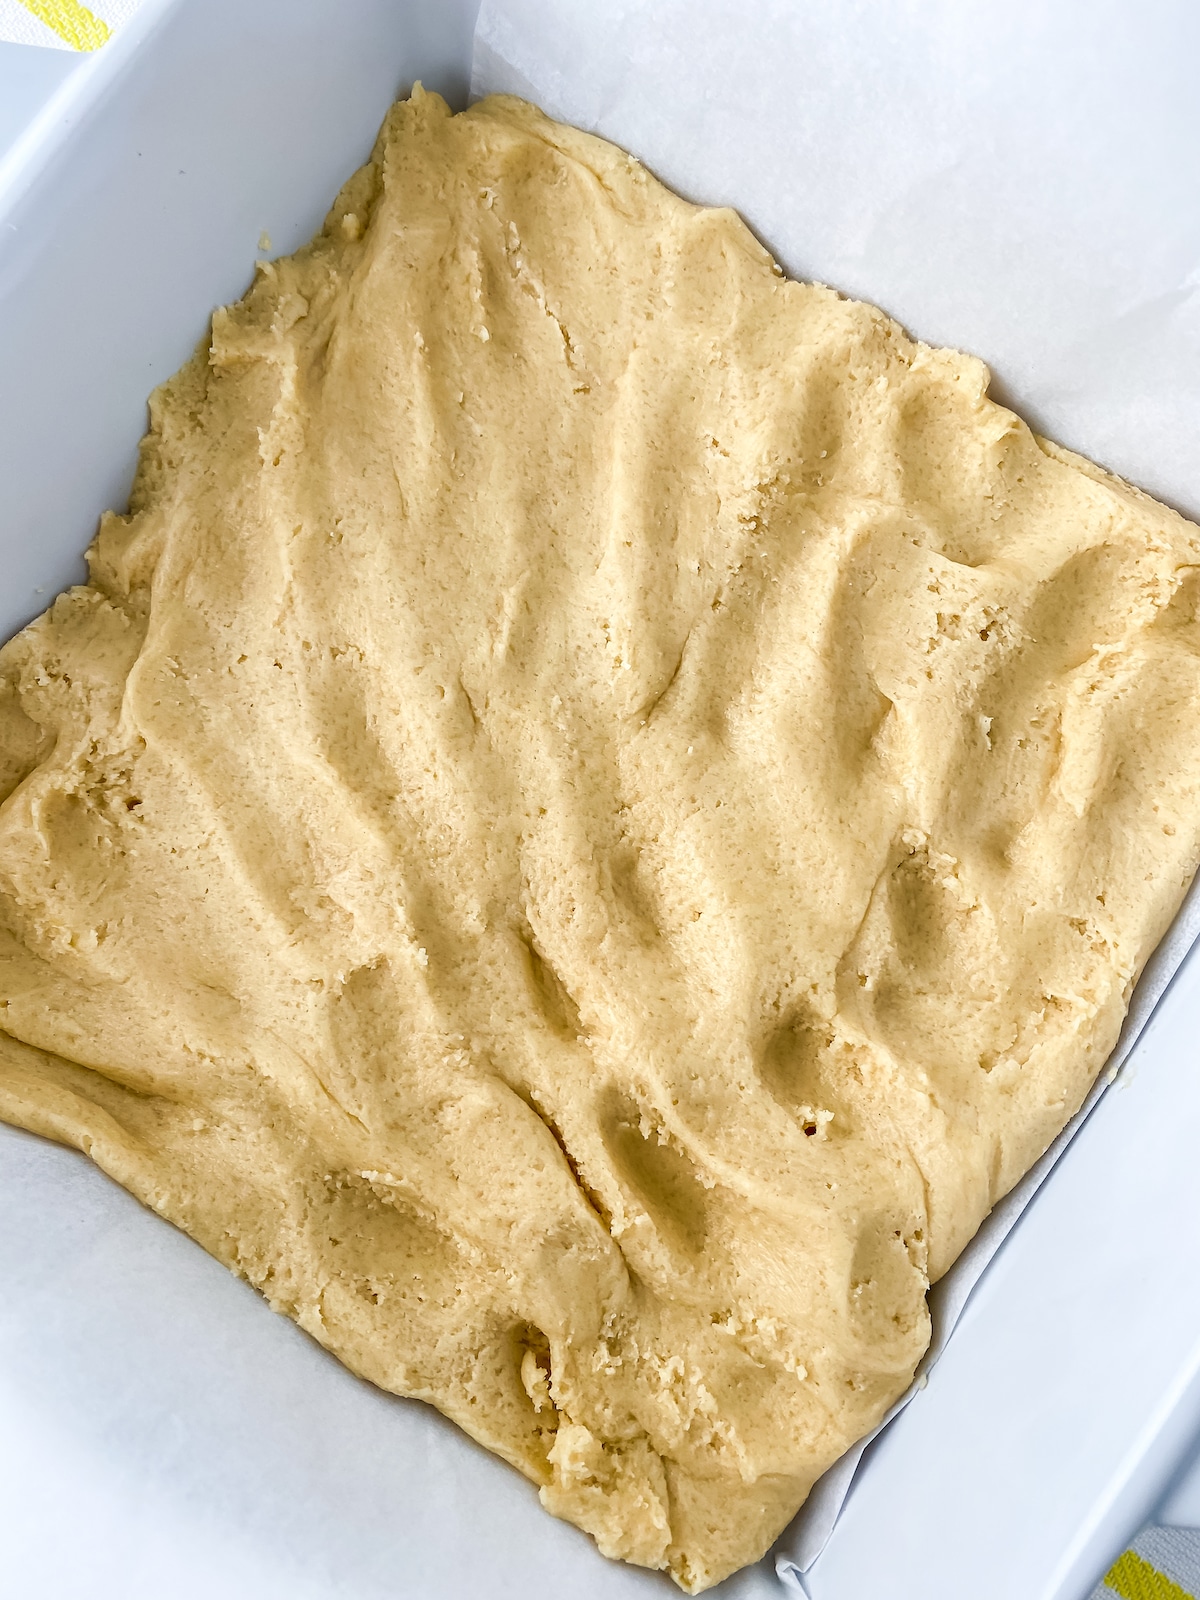 Cookie dough pressed into baking sheet before baking